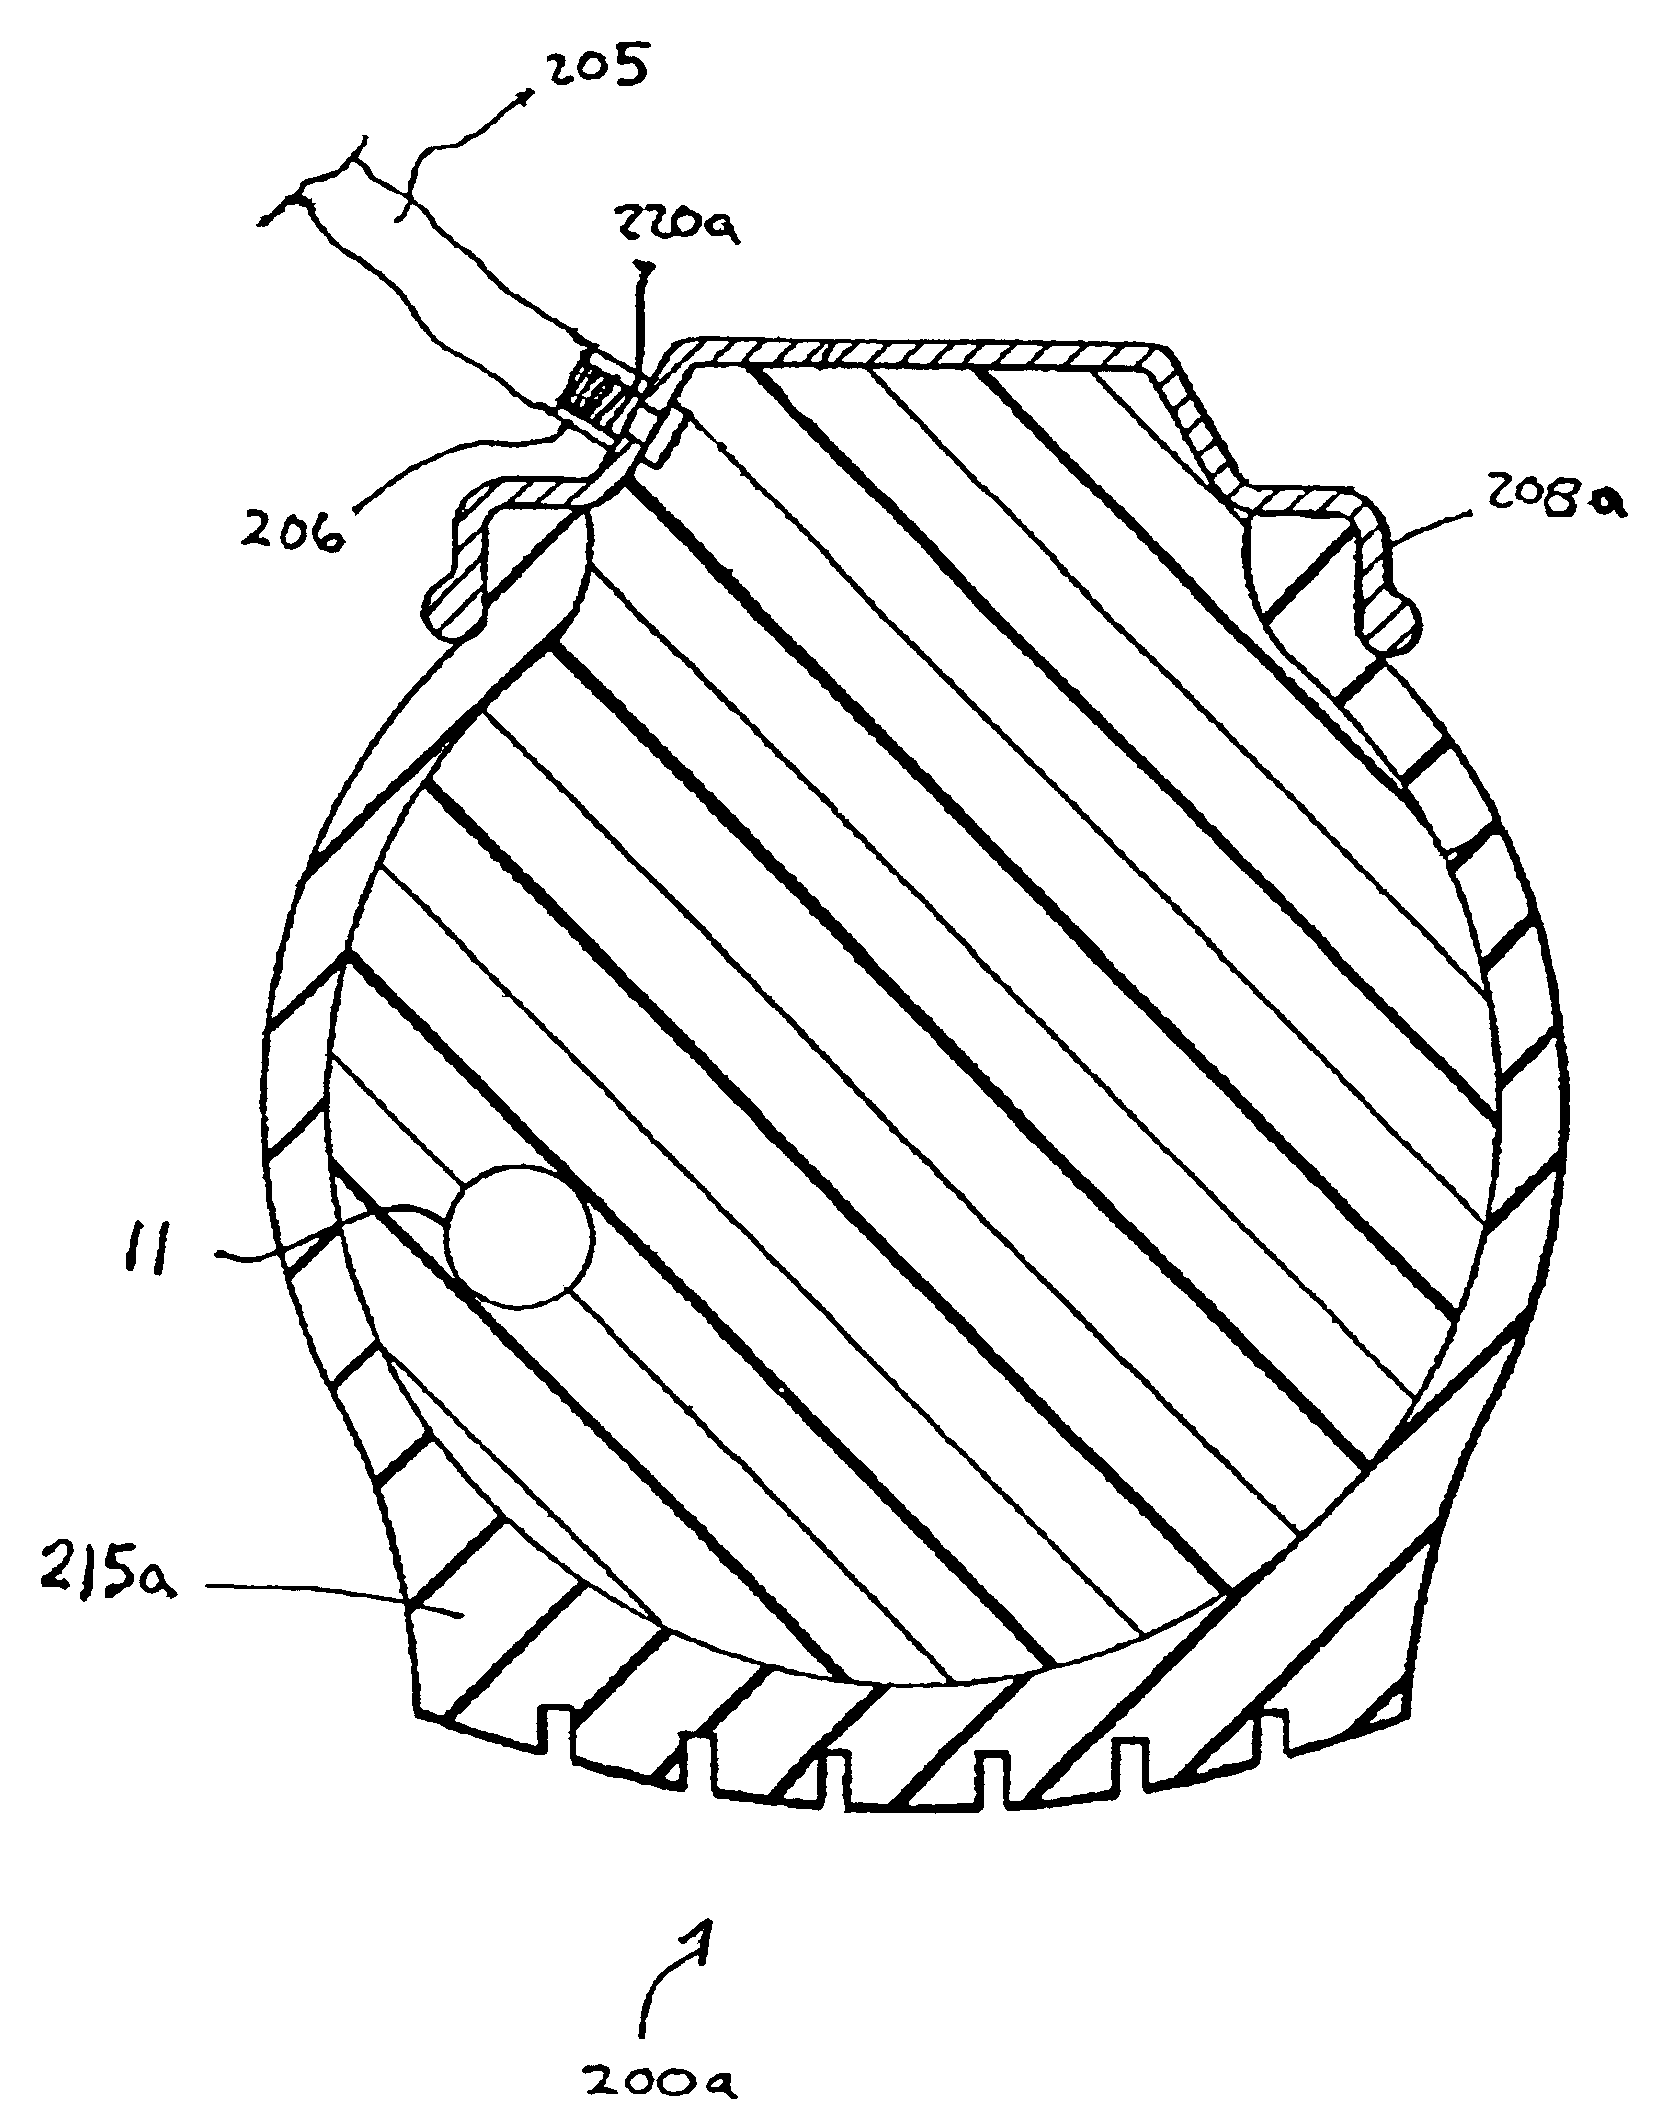 Method for making tires filled with flatproofing material